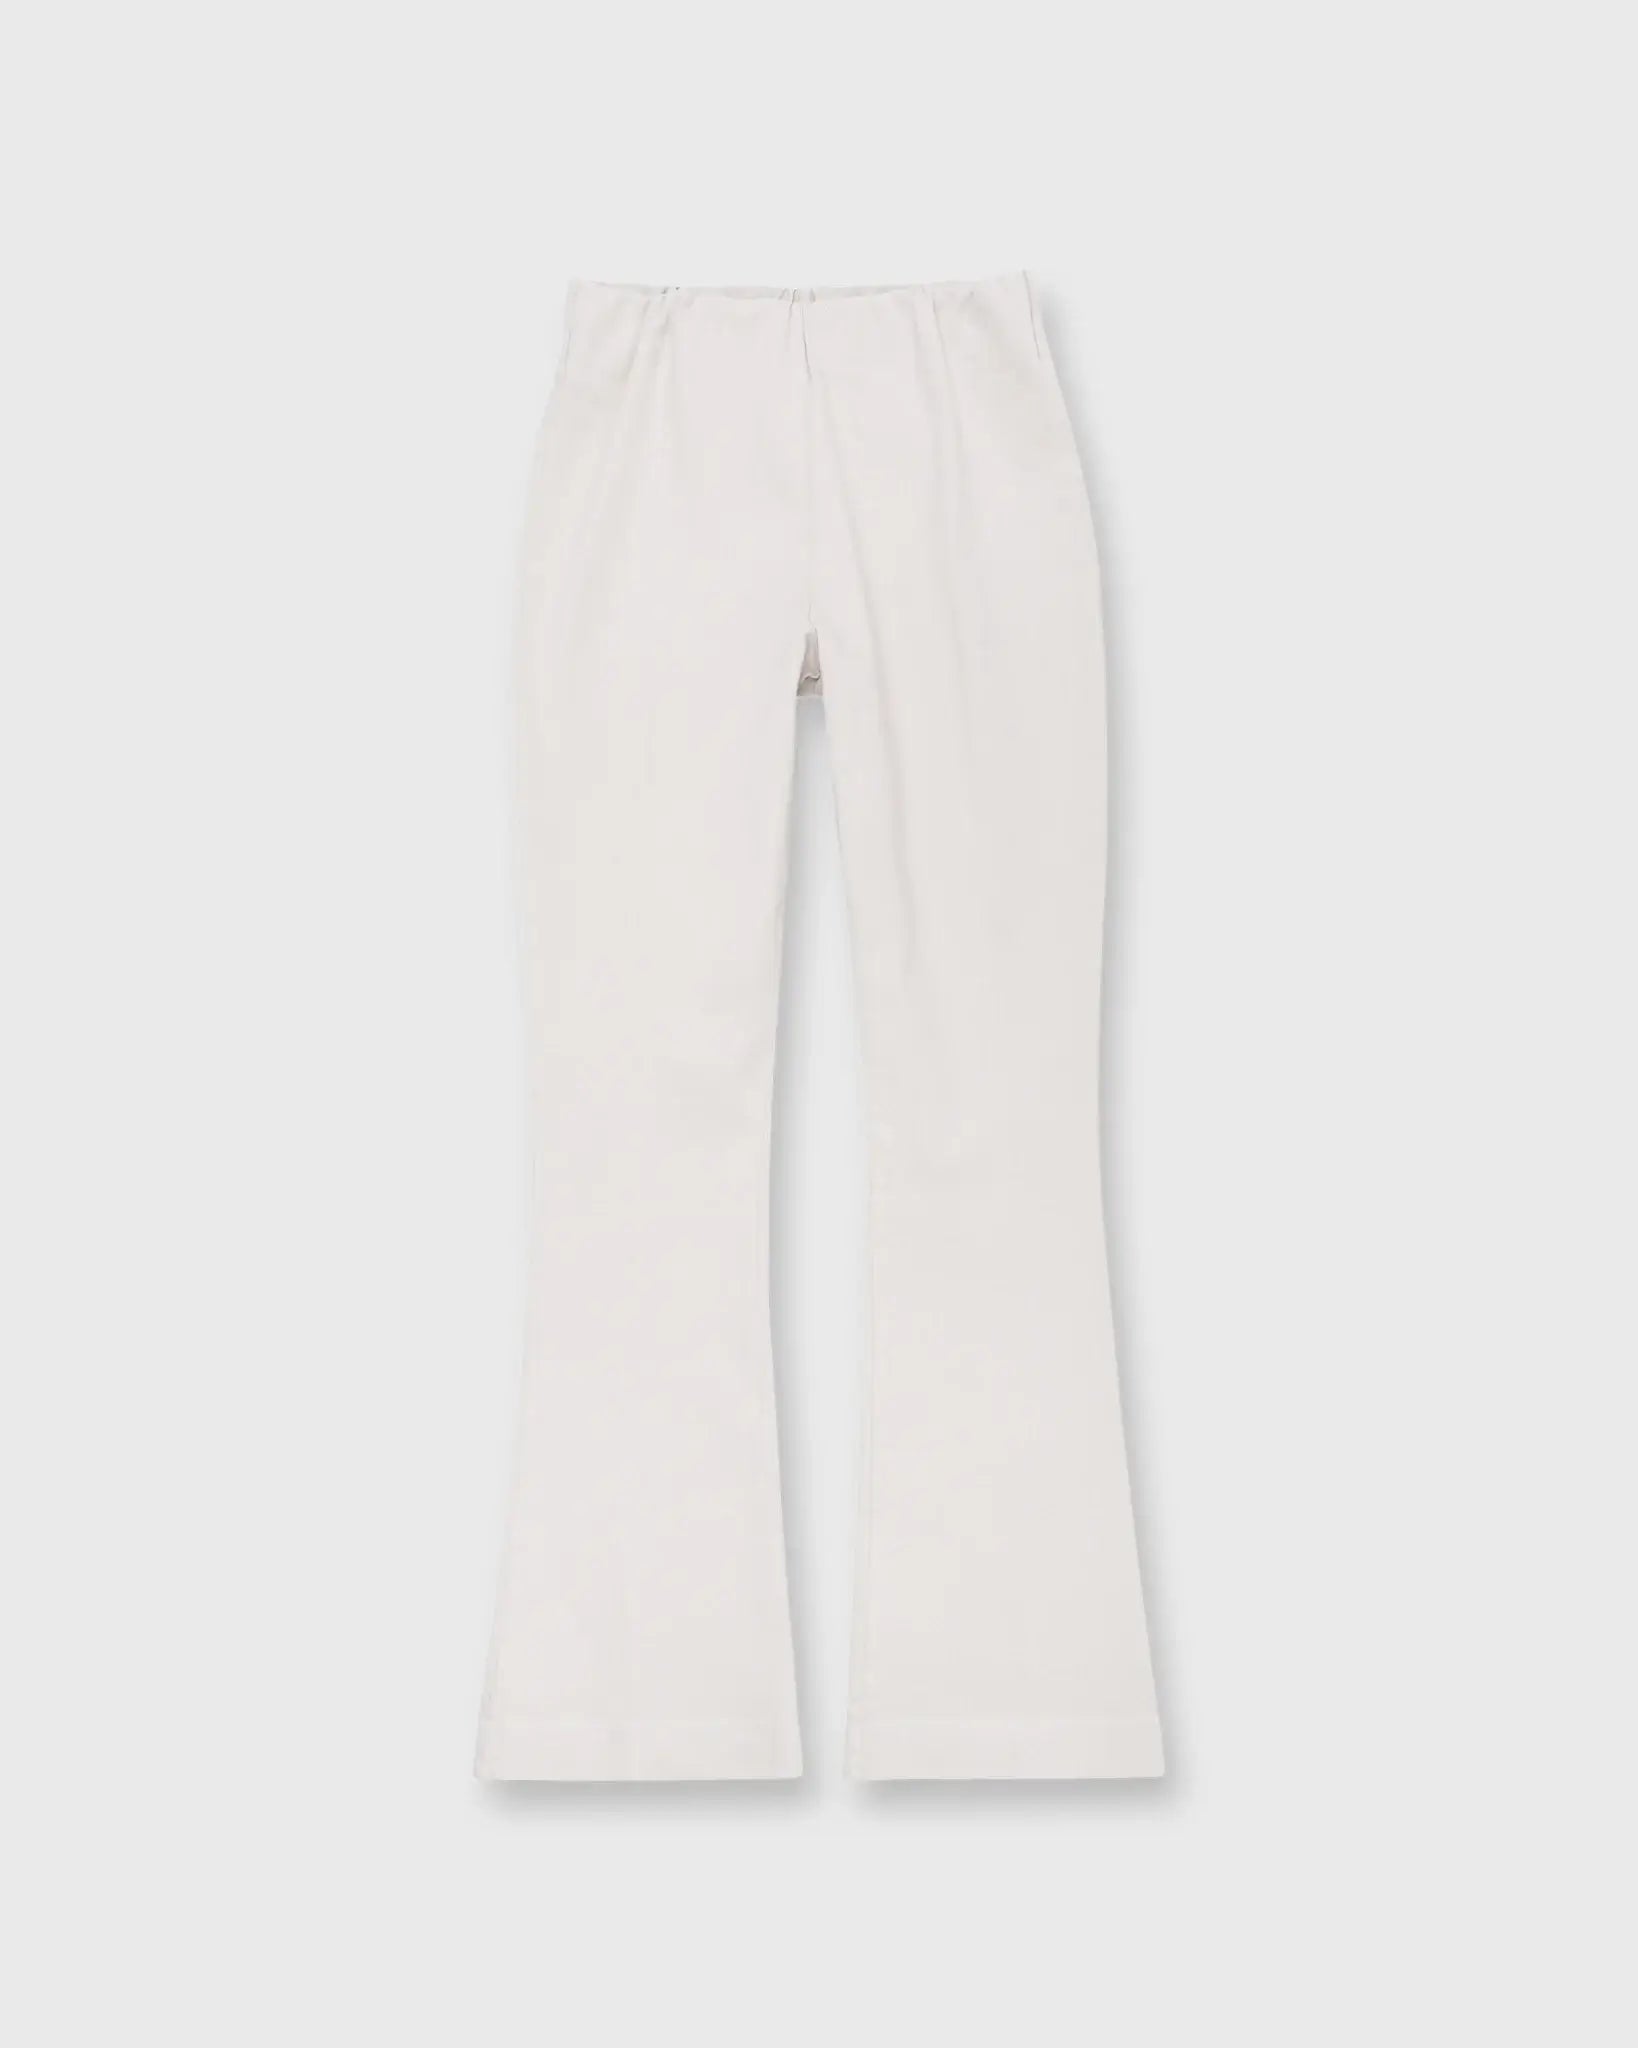 FAYE FLARE CROPPED PANT - Roan